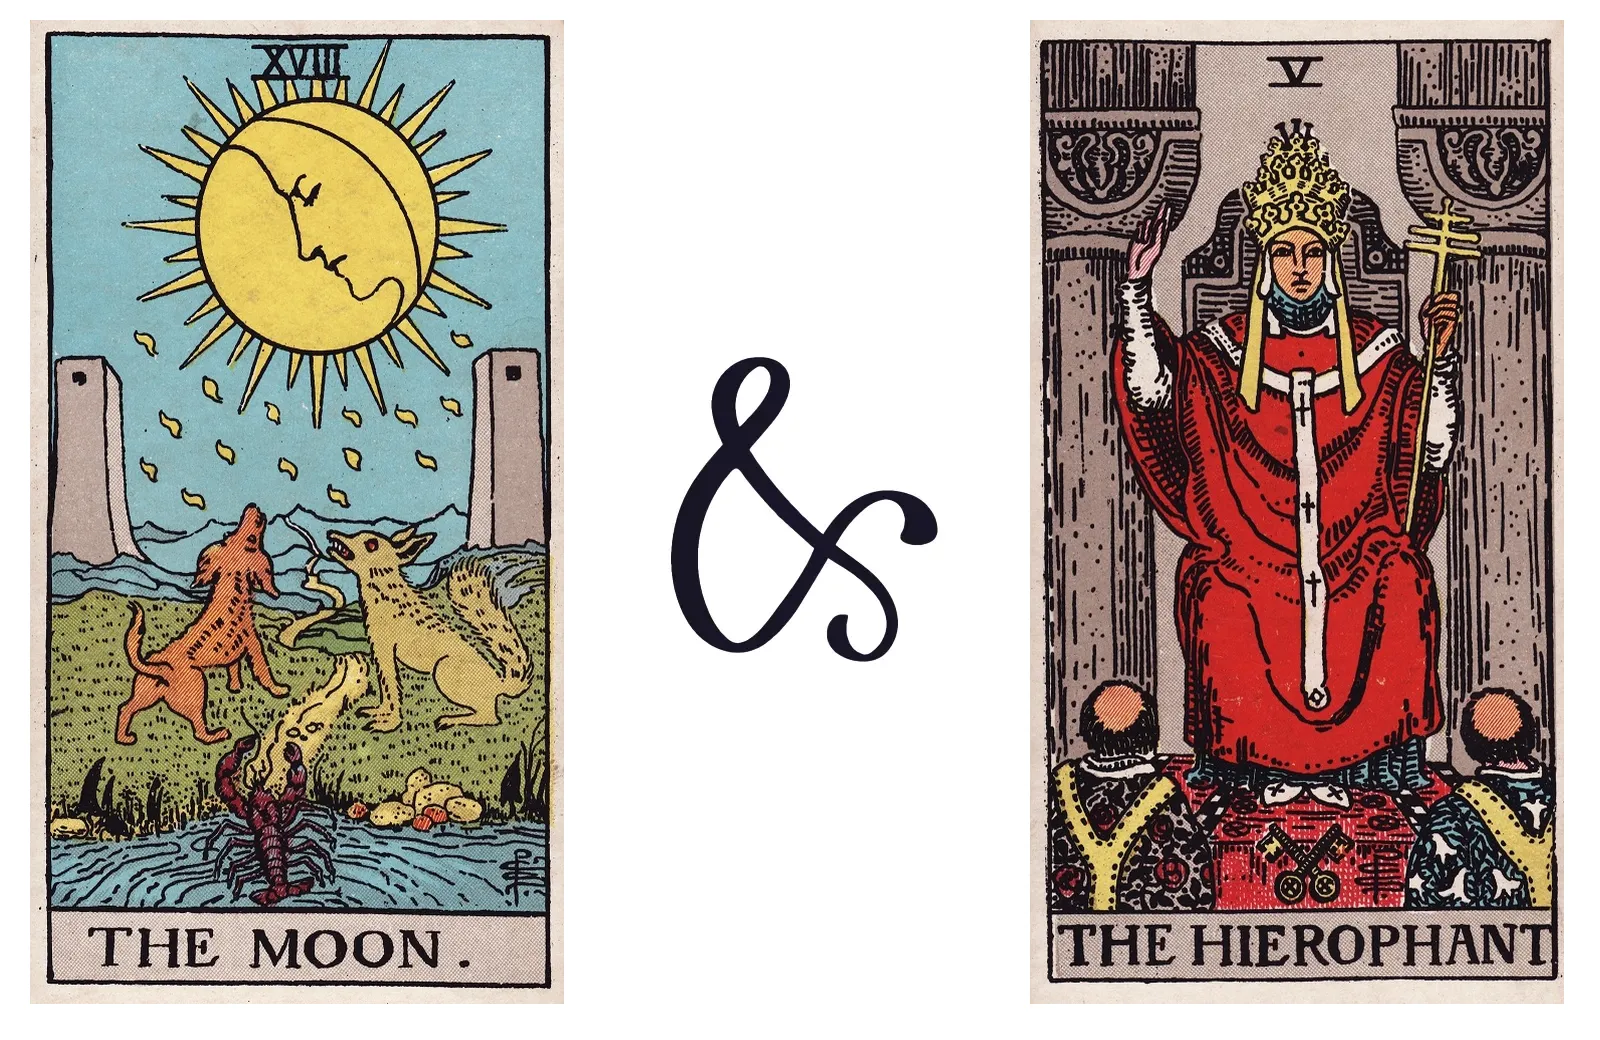 The Moon and The Hierophant